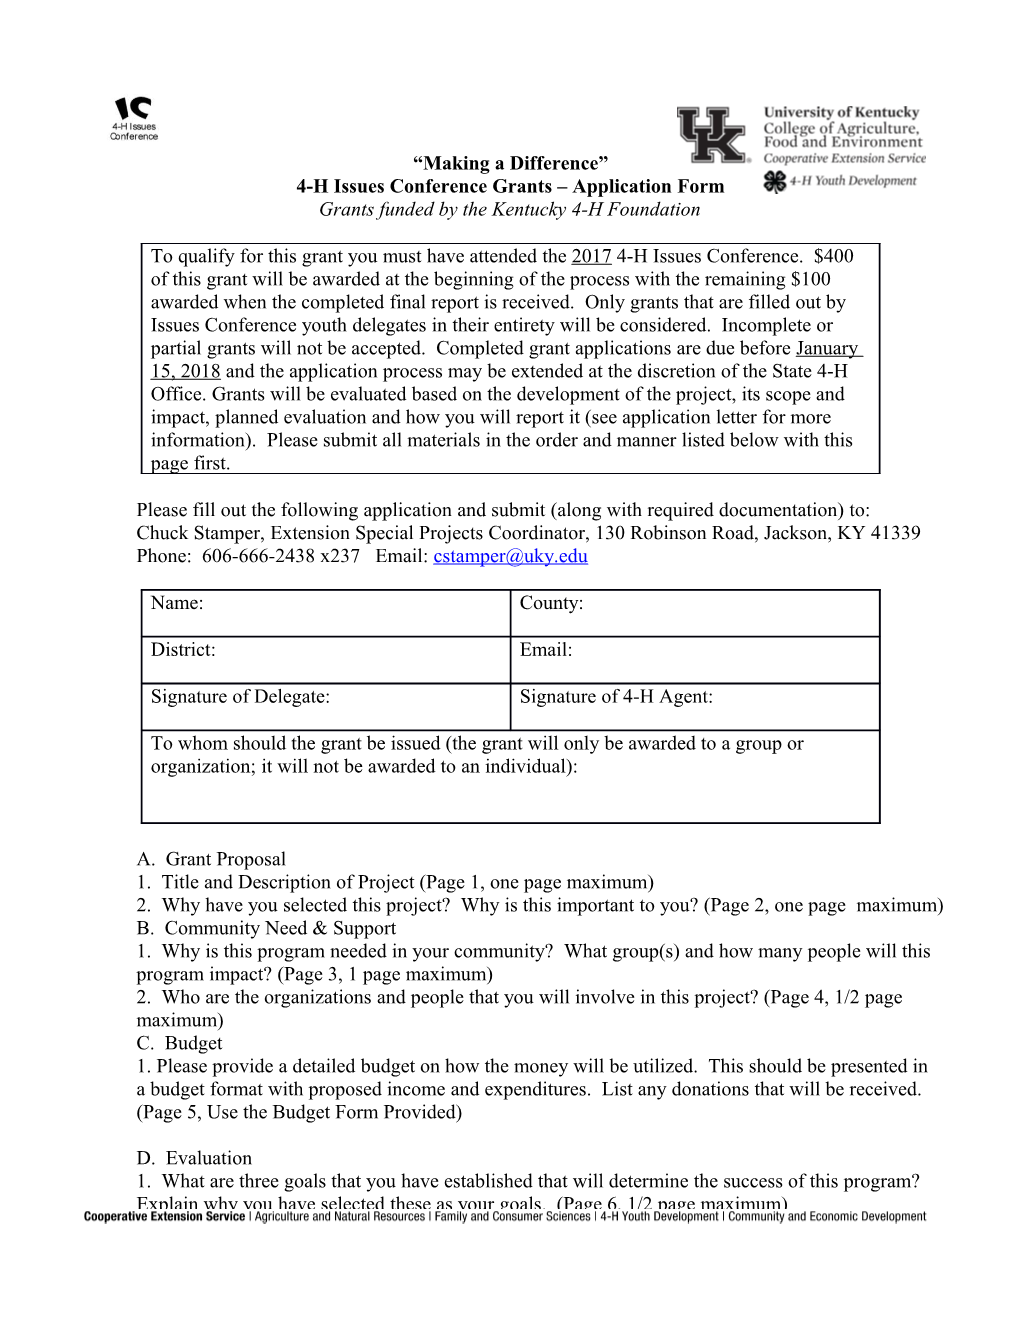 4-H Issues Conference Grants Application Form